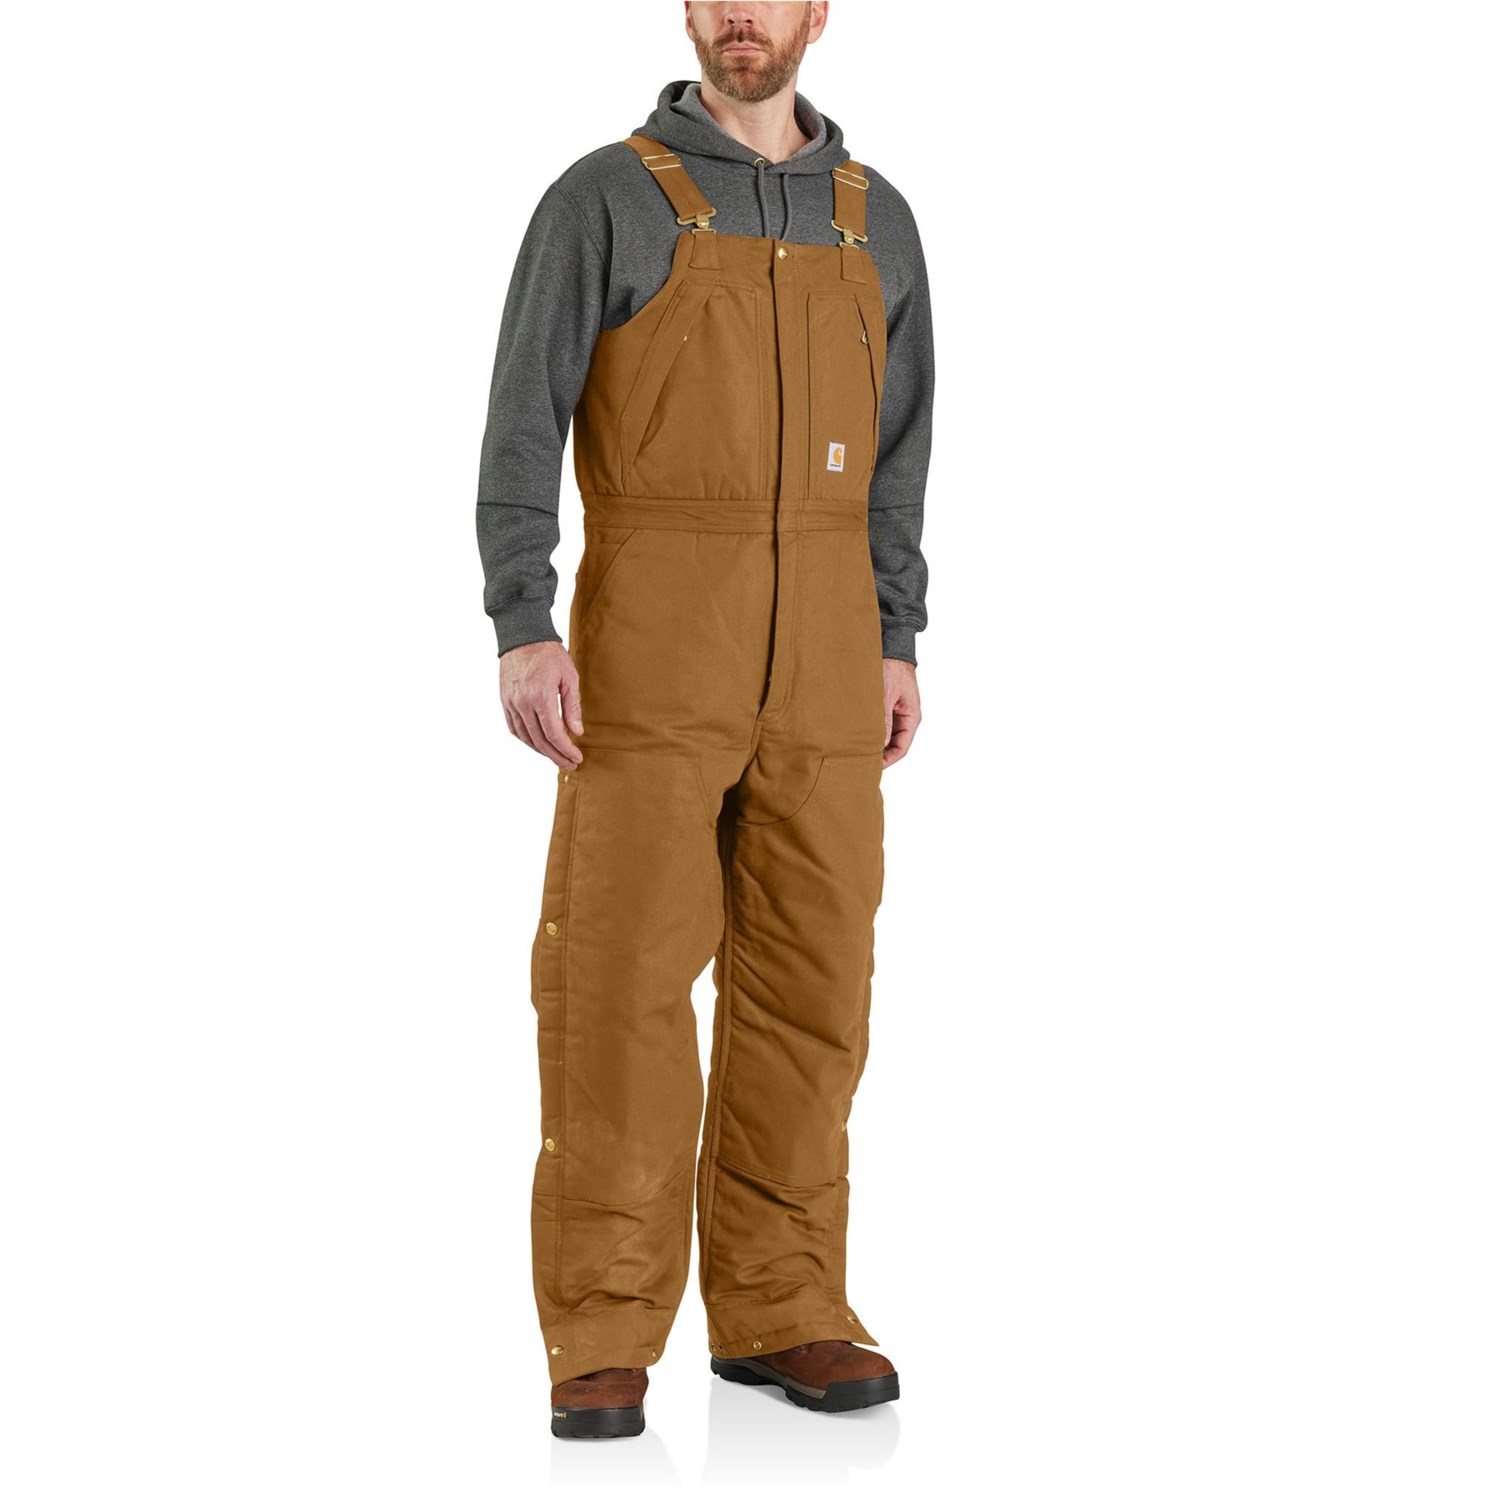 Carhartt 105470 Big and Tall Loose Fit Firm Duck Bib Overalls - Insulated, Factory Seconds